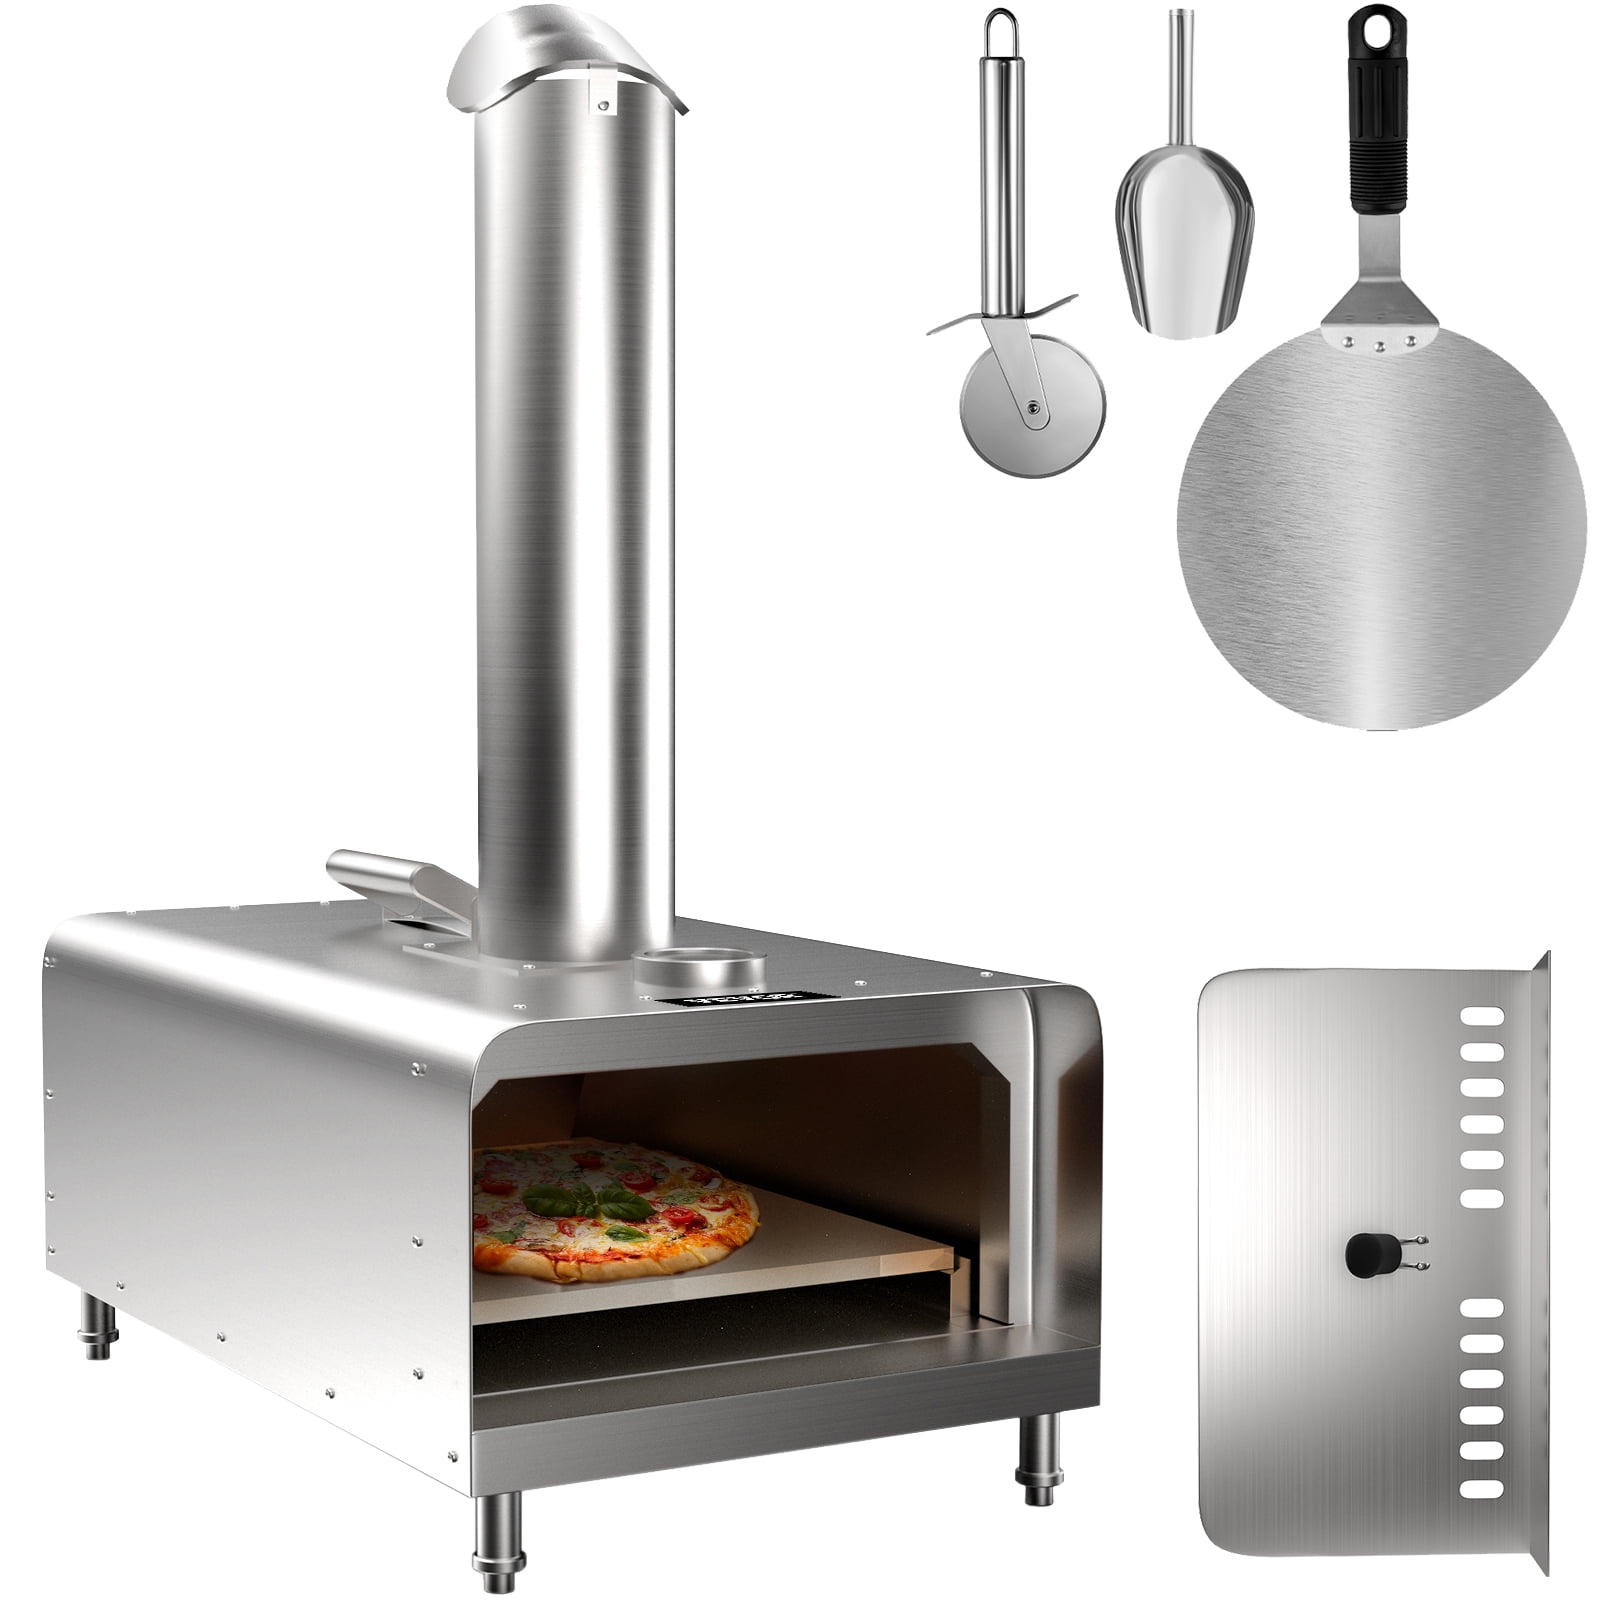 VEVOR Portable Pizza Oven 12", Stainless Steel Pizza Oven Outdoor, Charcoal & Pizza Maker with Adjustable Feet, Wood Oven with Complete Accessories for Outdoor Cooking, Silver - Walmart.com